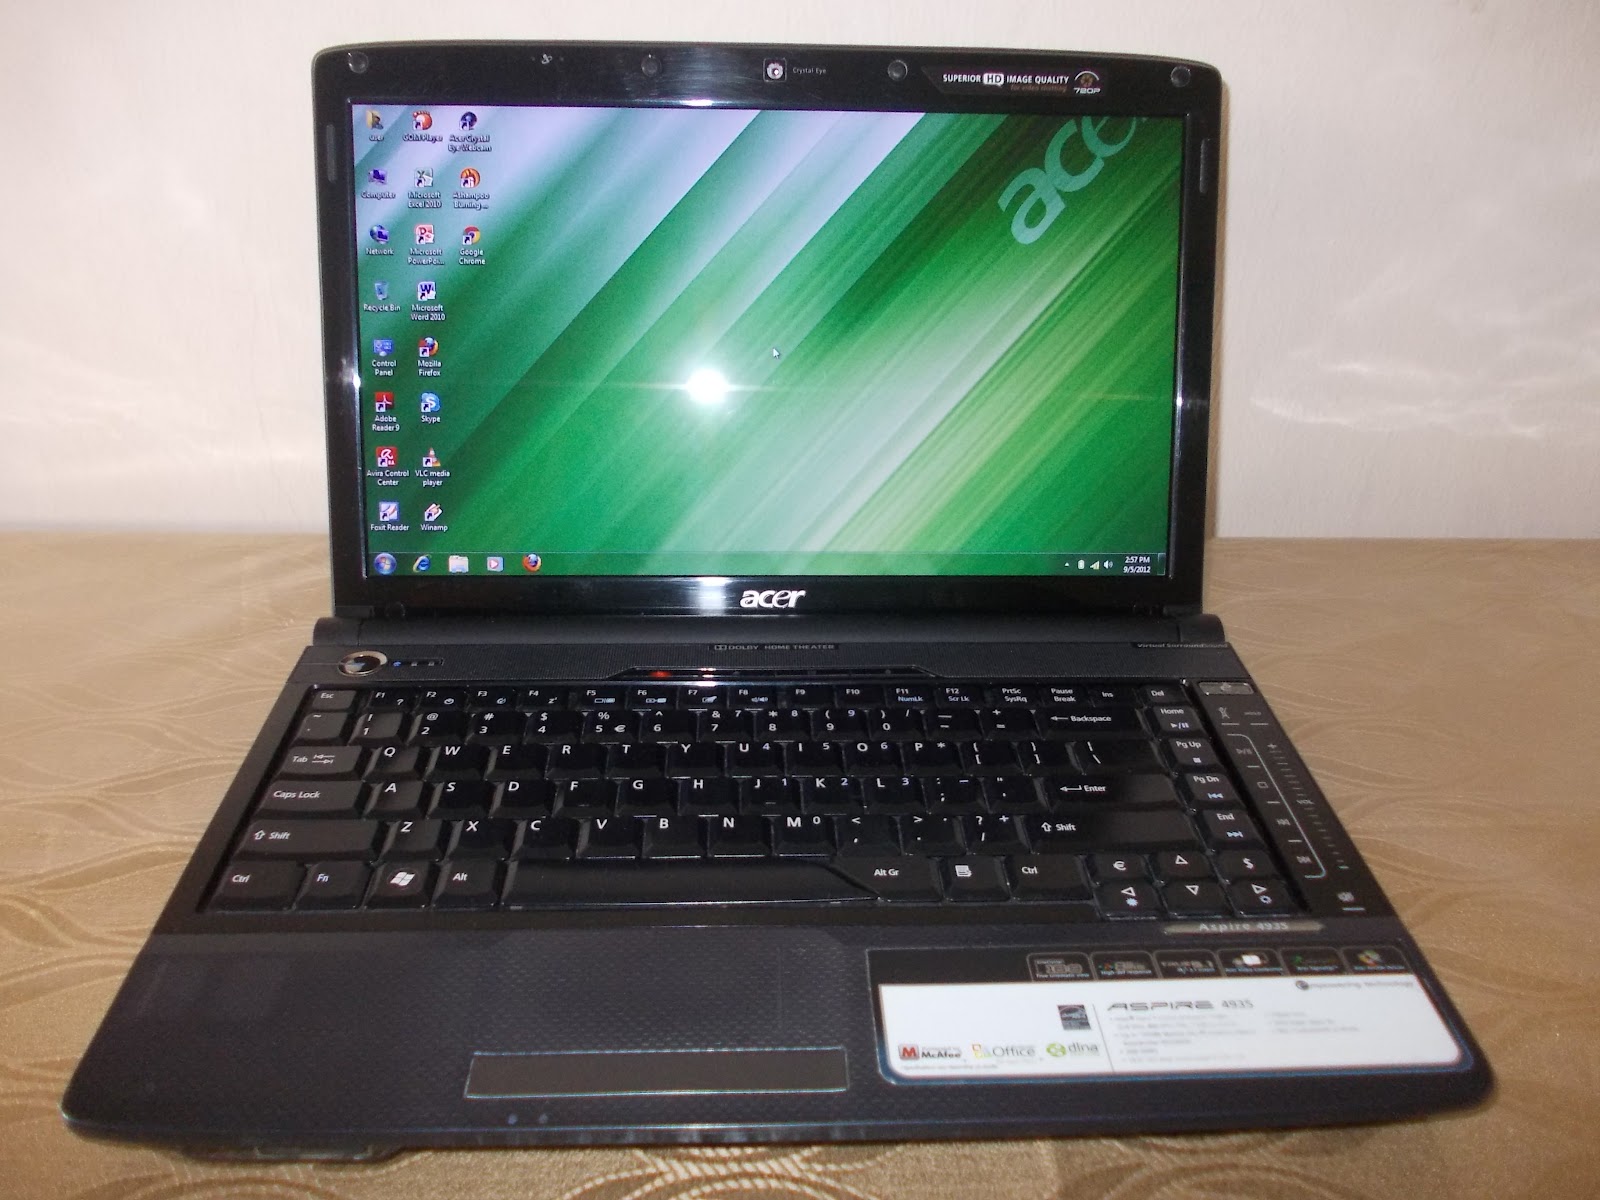 Three A Tech Computer Sales and Services: USED Laptop Acer Aspire 4935 (RM 785)1600 x 1200